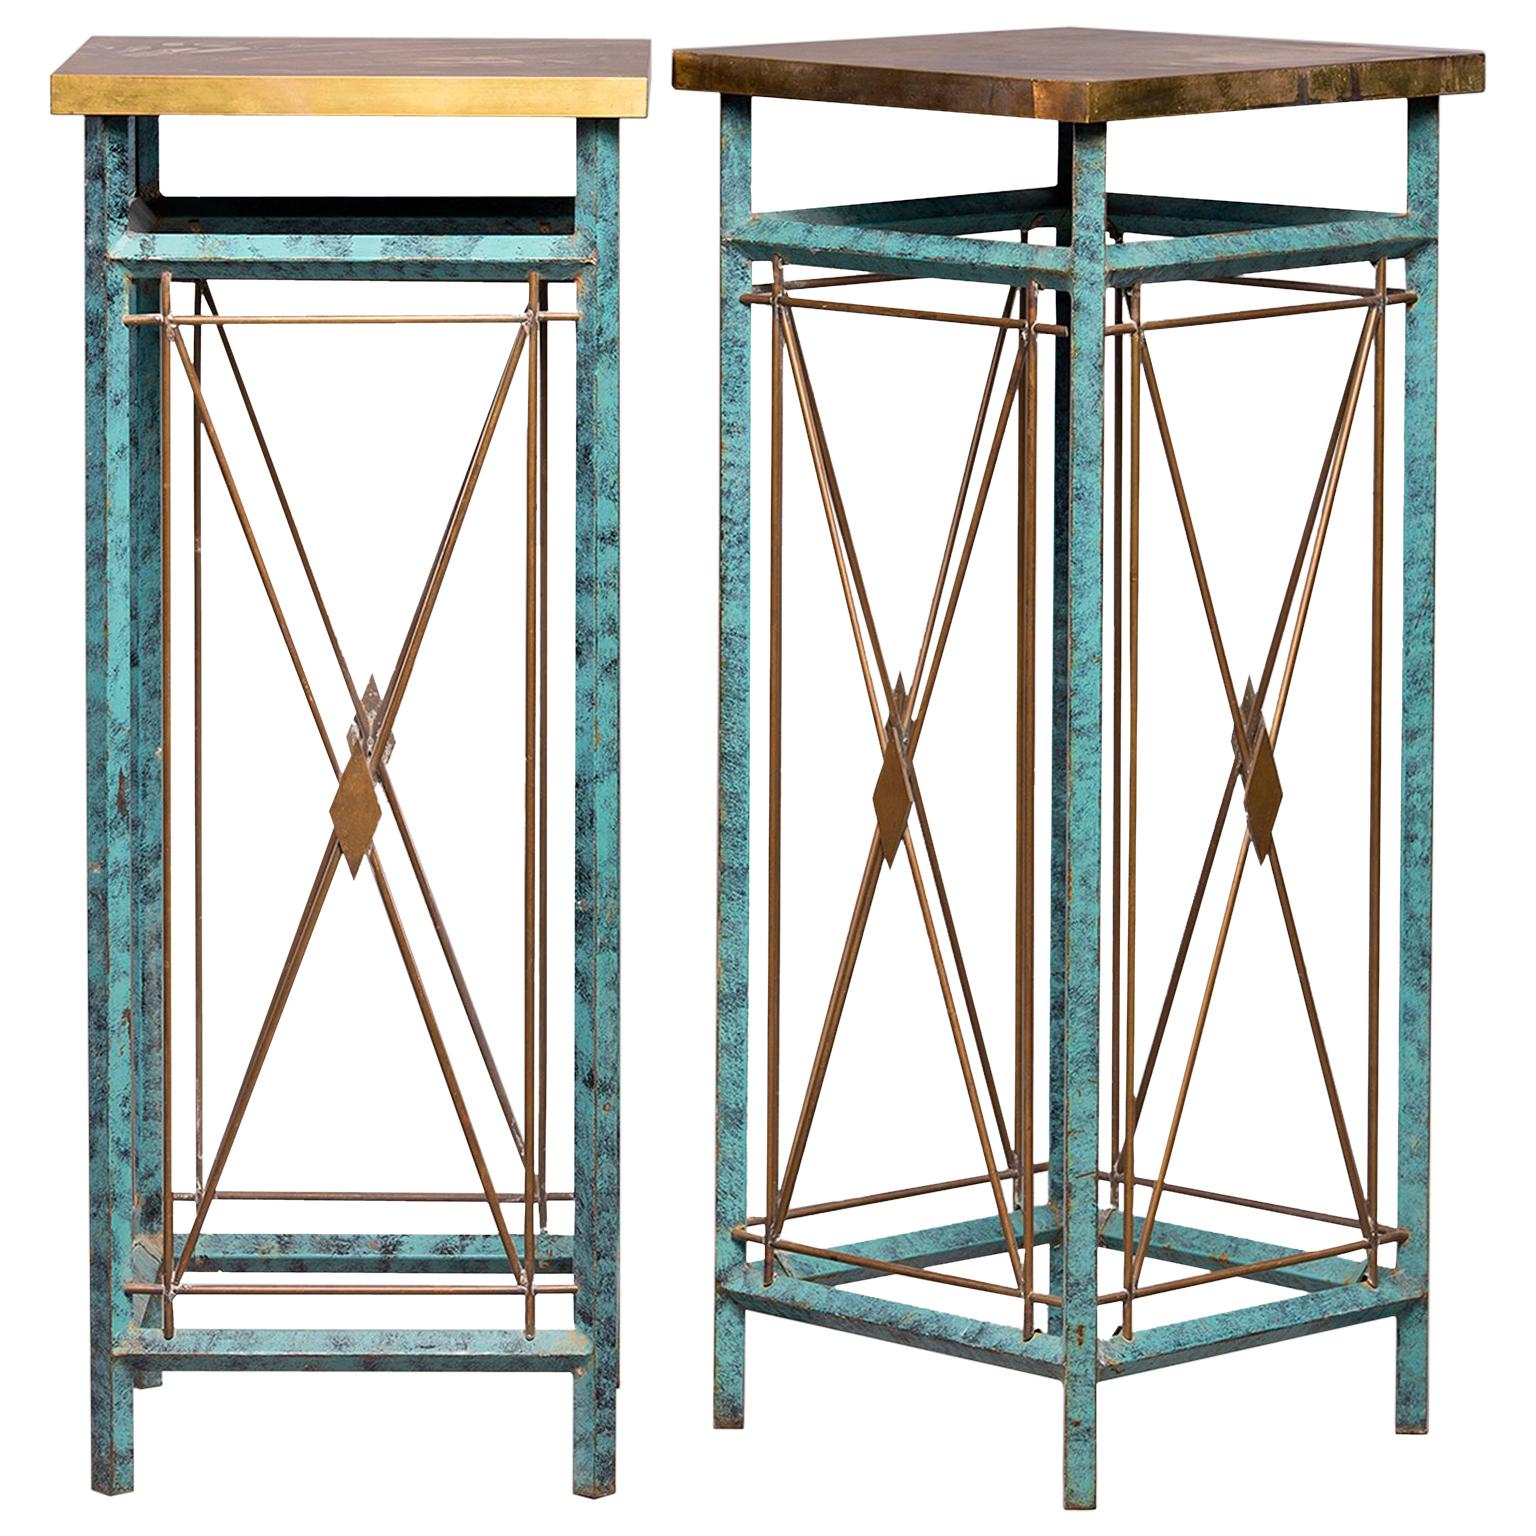 Pair of tall metal statue or plant stands feature verde green legs with contrasting brass x-form cross pieces with diamond shaped centers and brass table tops, circa 1960s. Found in Italy. Unknown maker. Sold and priced as a pair.